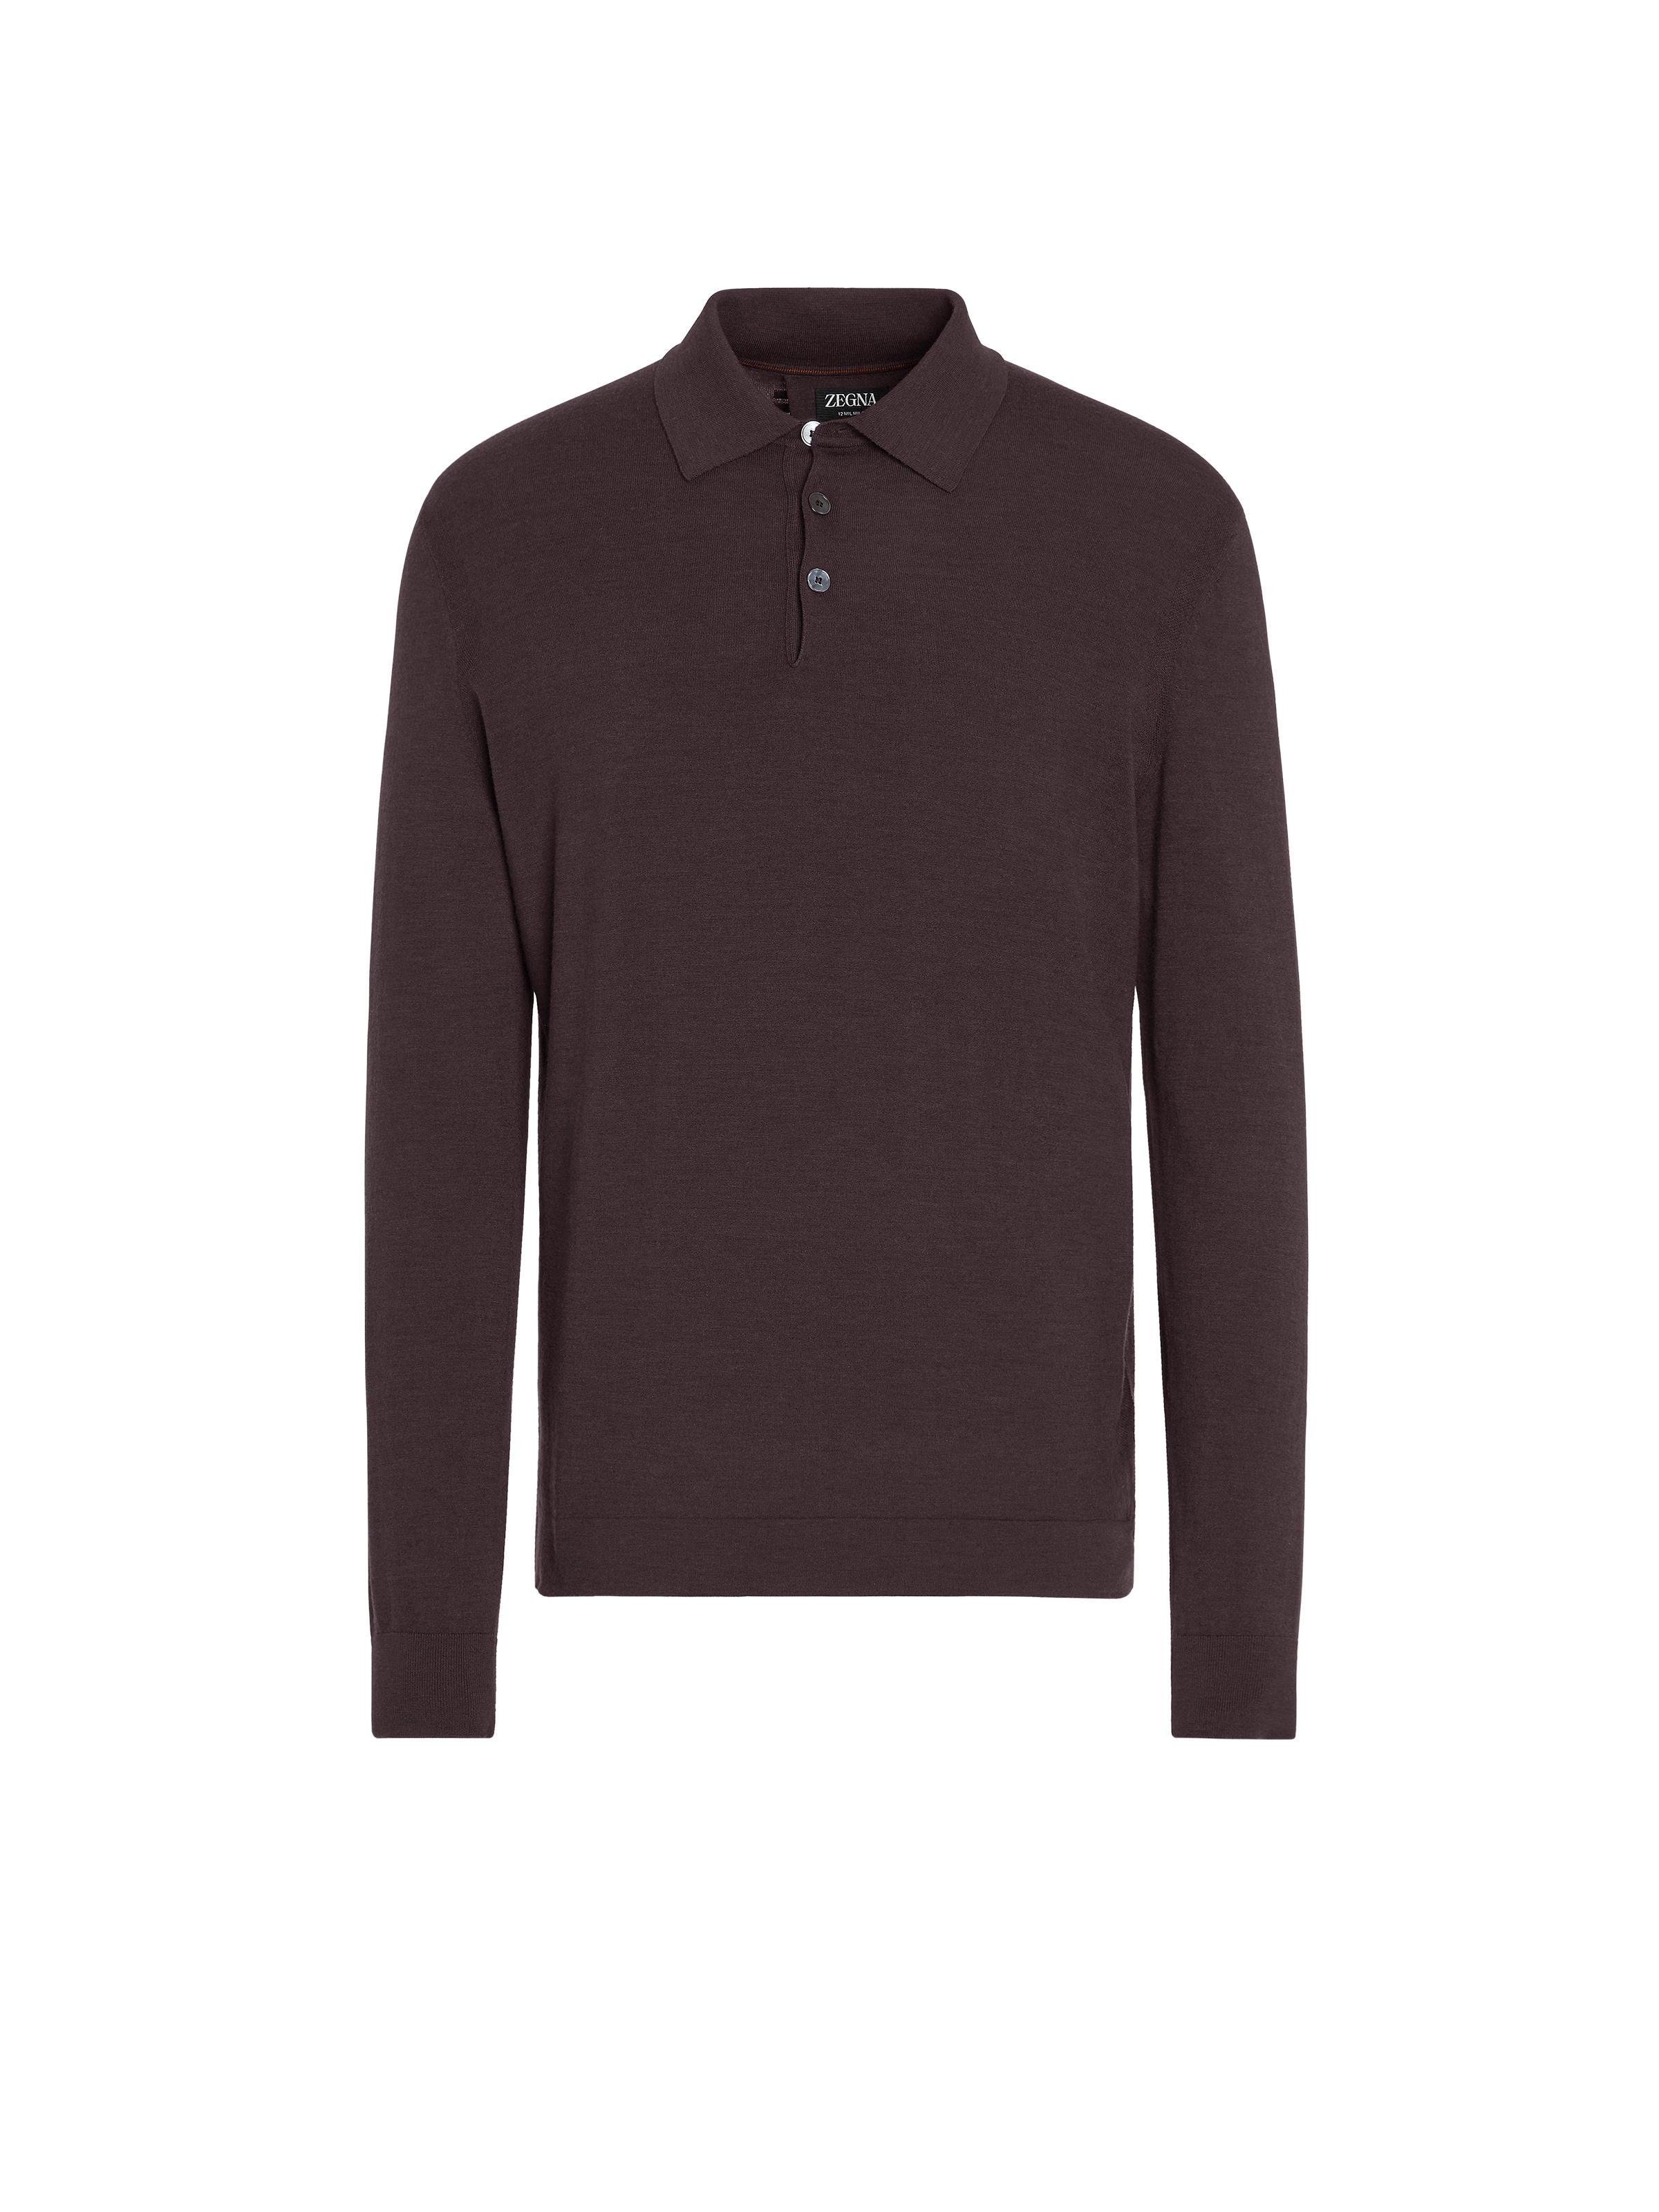 Zegna Long-sleeved Polo Shirt In Bordeaux